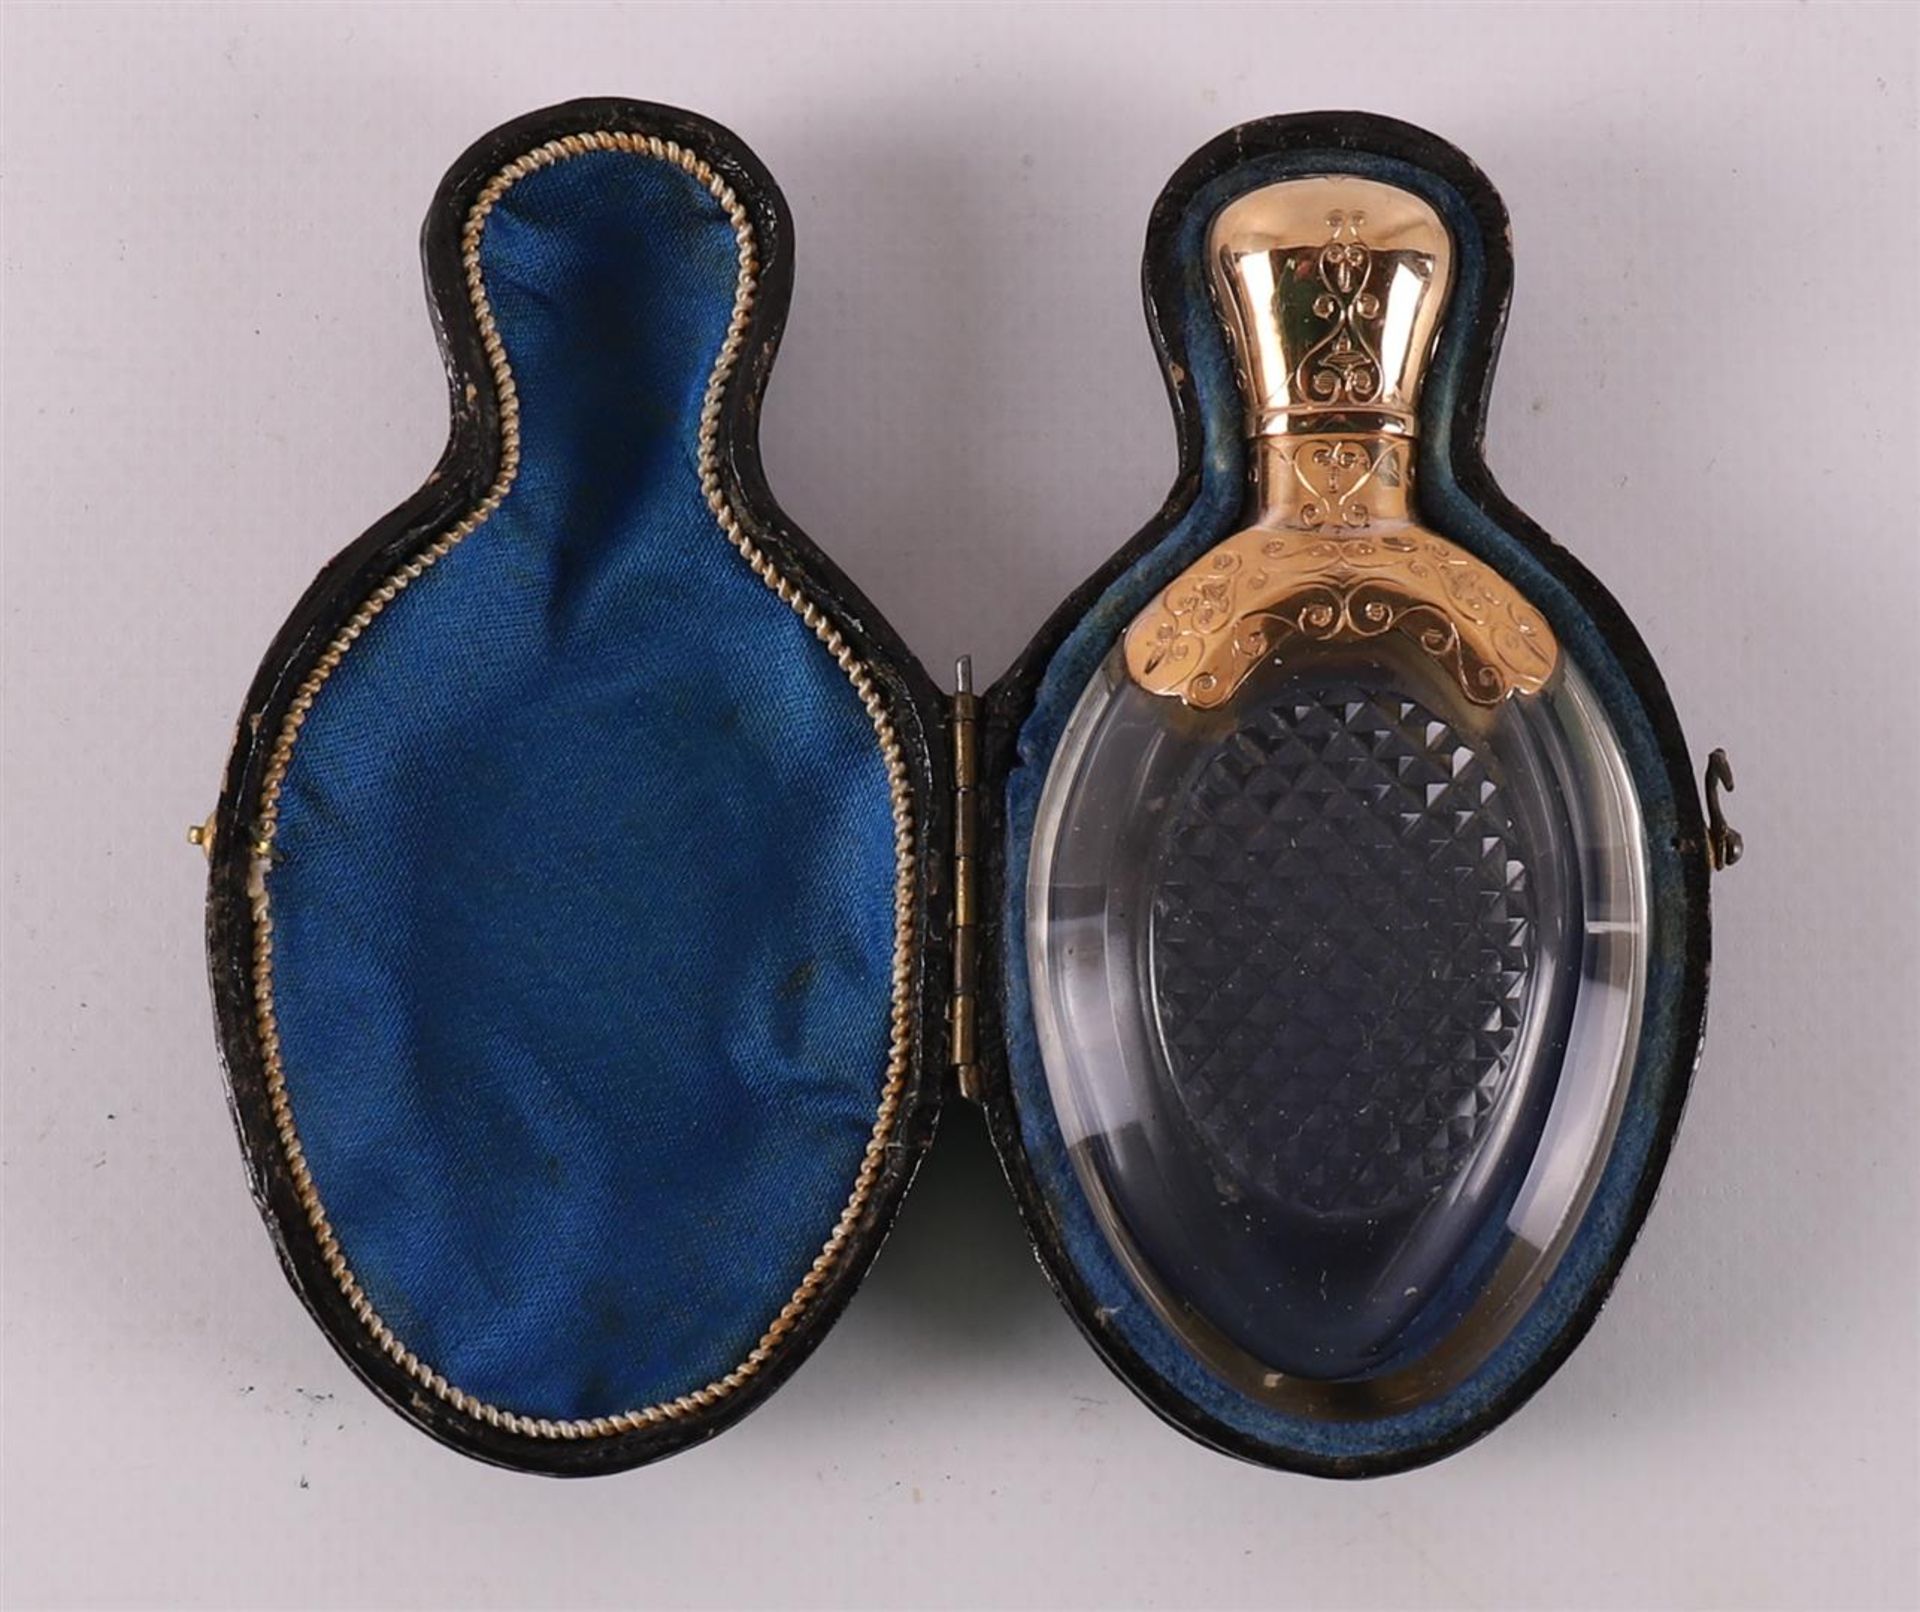 A clear crystal odor flask with gold lid and frame, around 1900